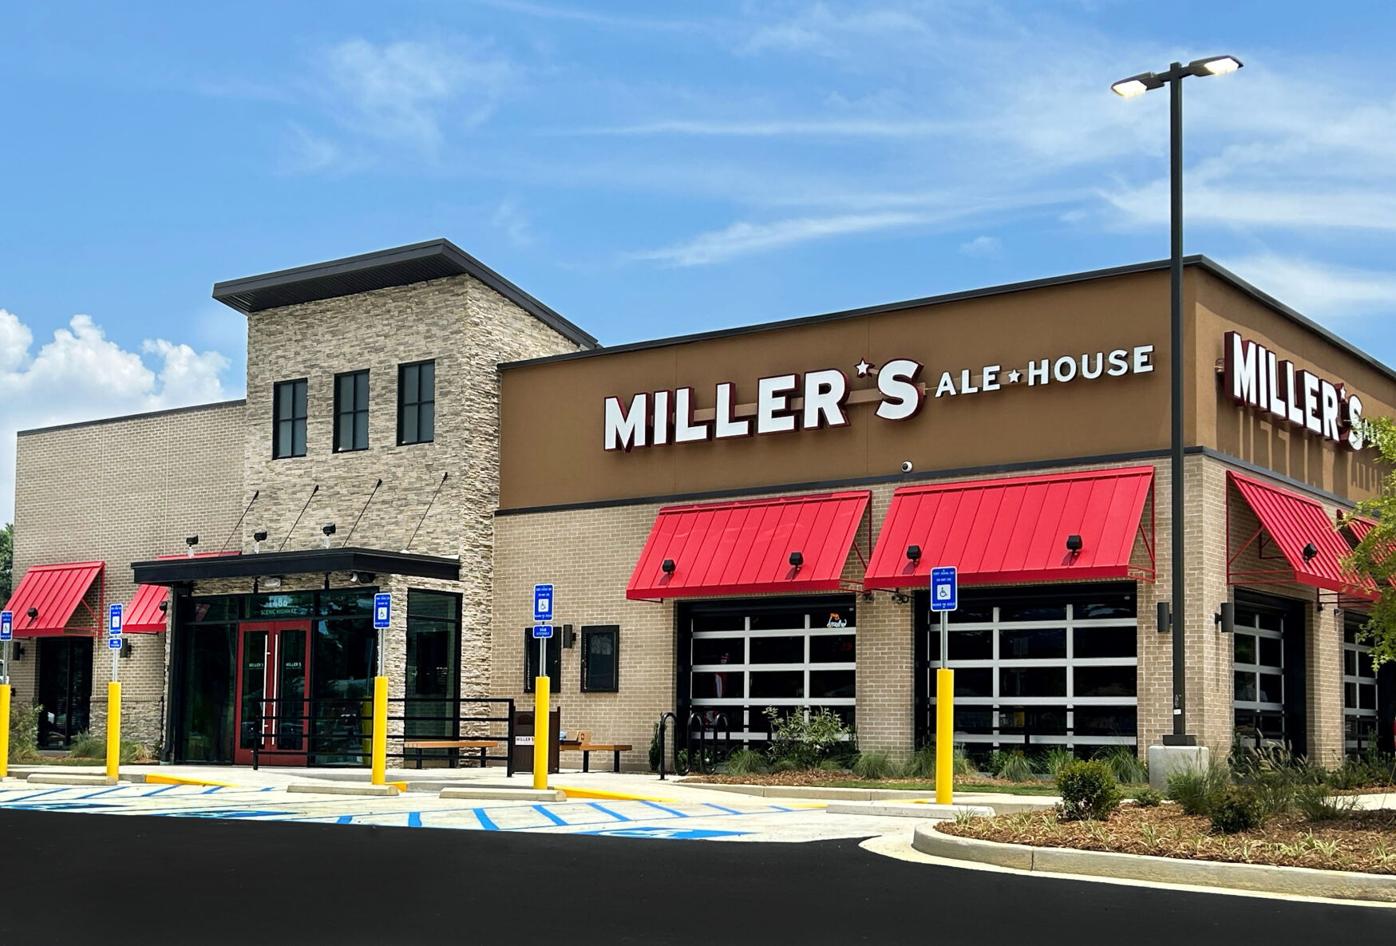 Miller’s Ale House